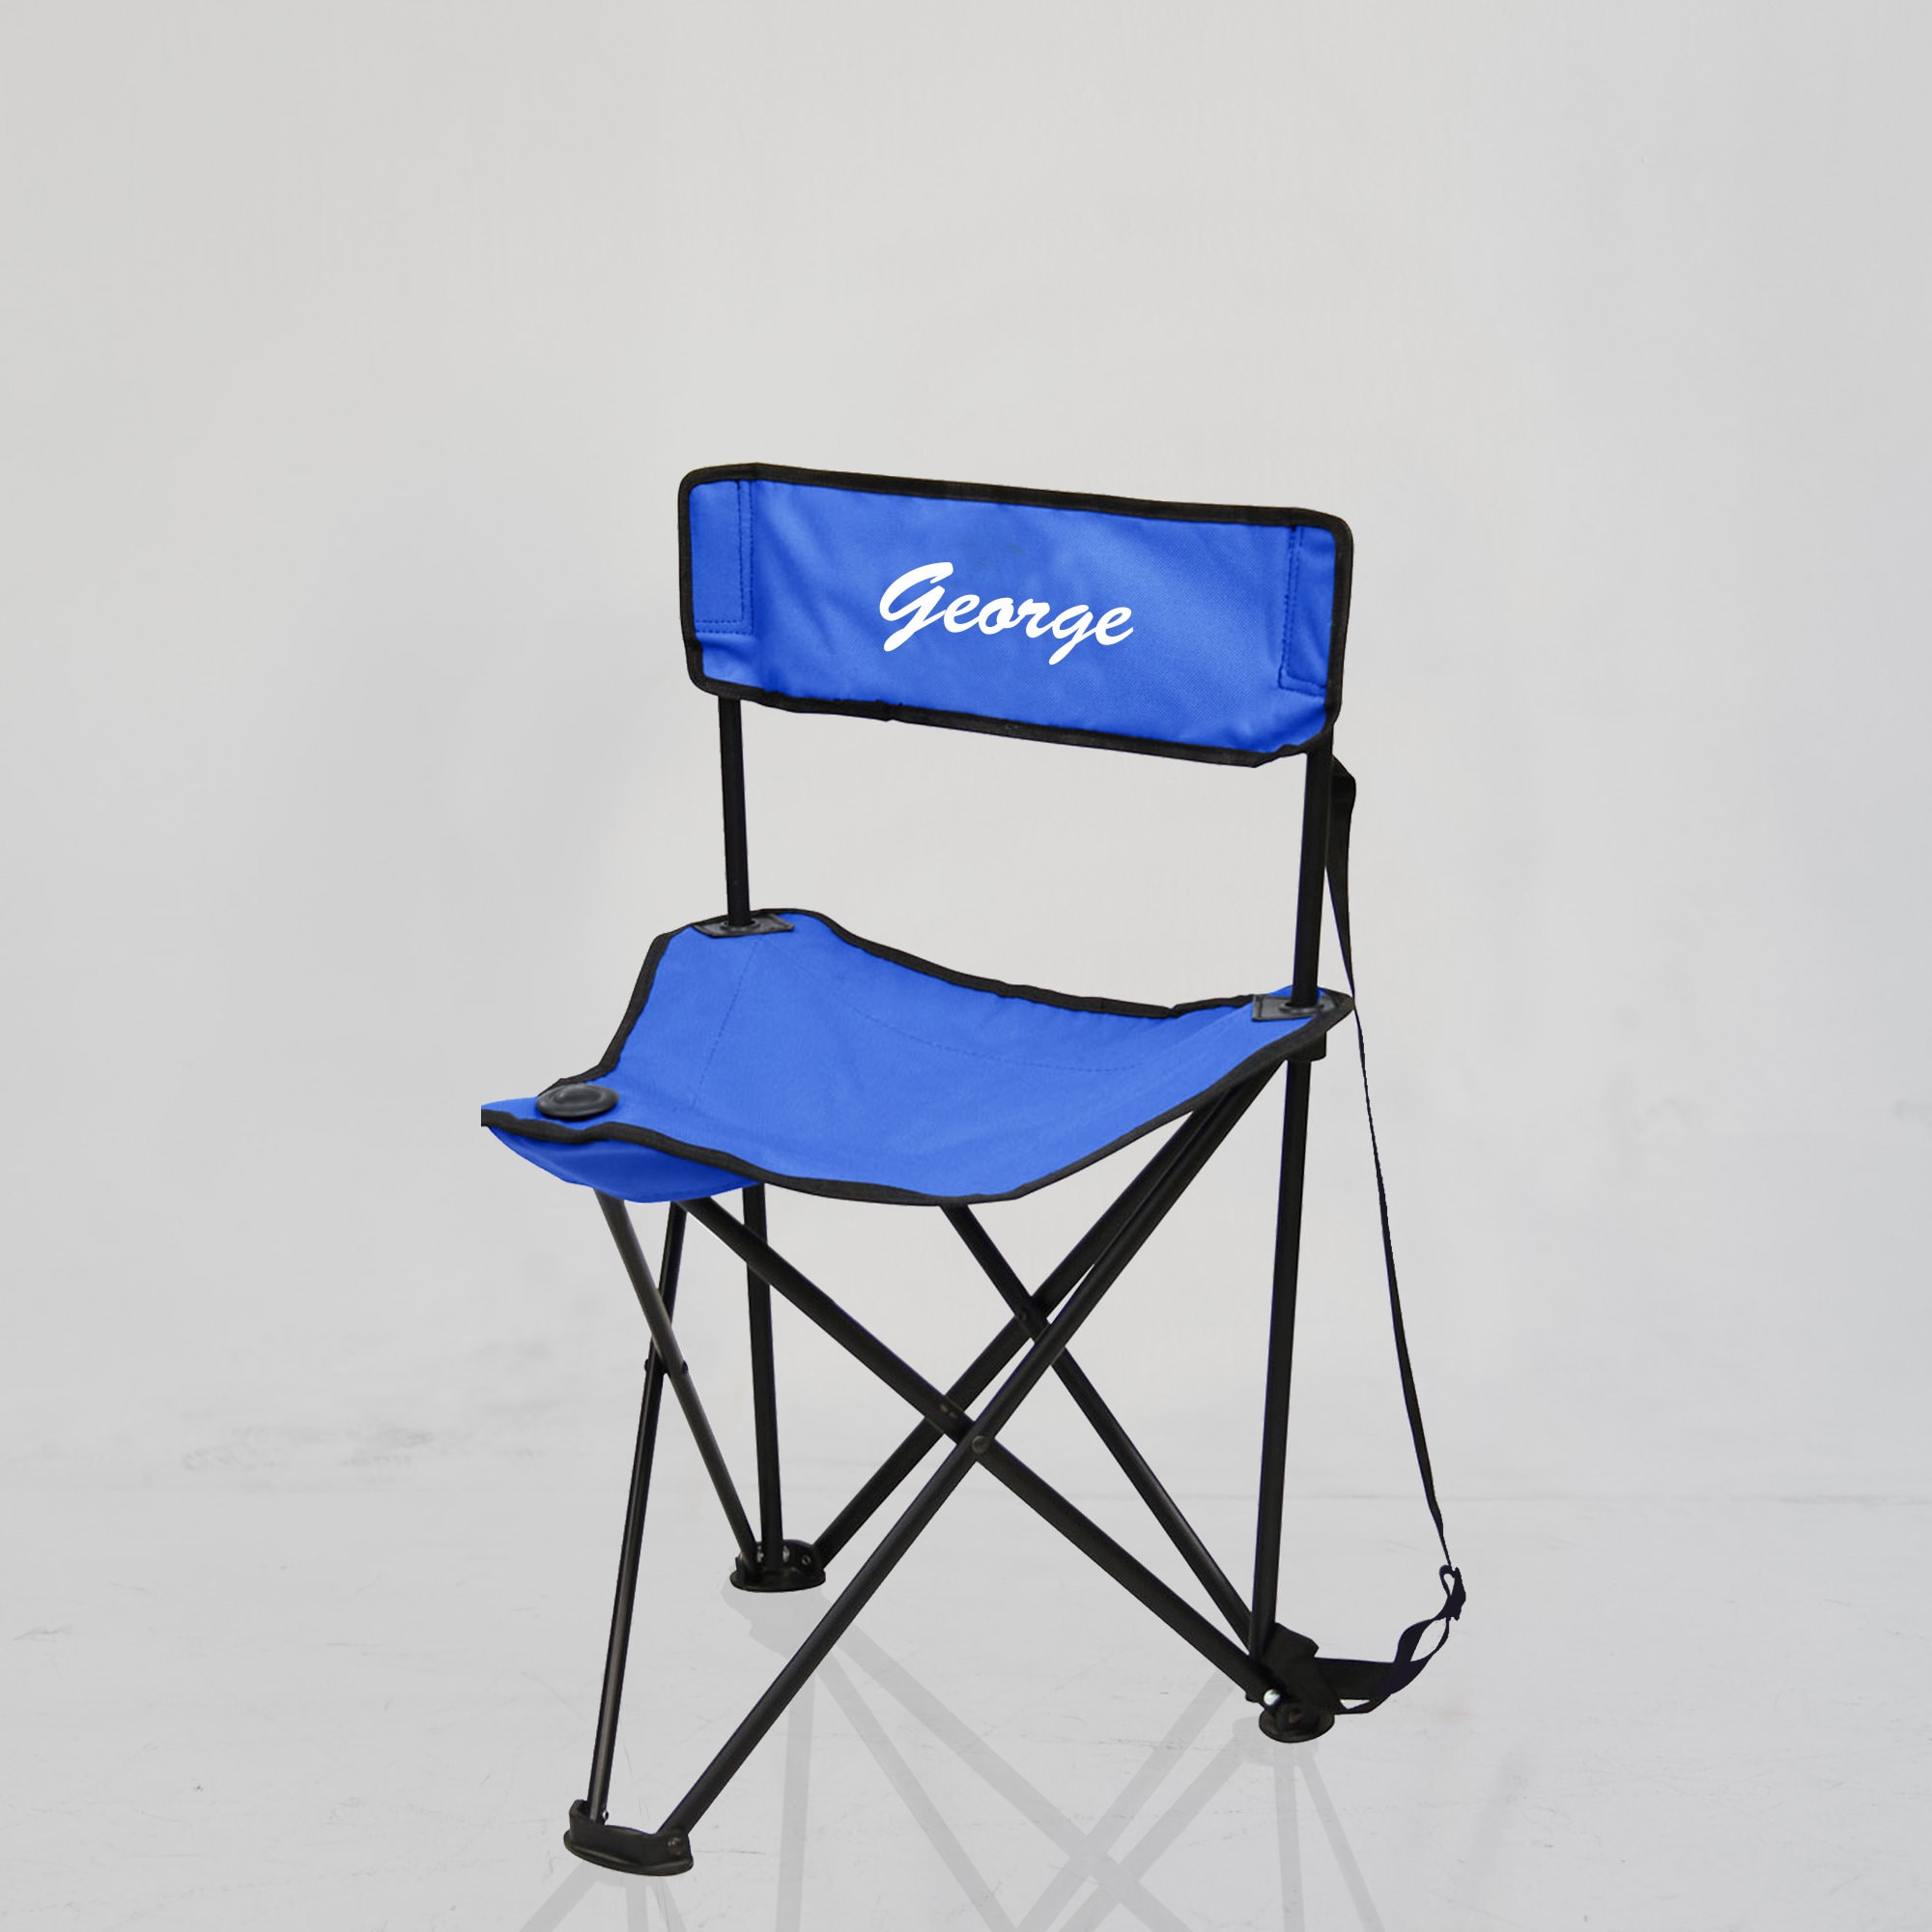 Portable Chair Outdoor Camping Chair Blue Compact Backpacking